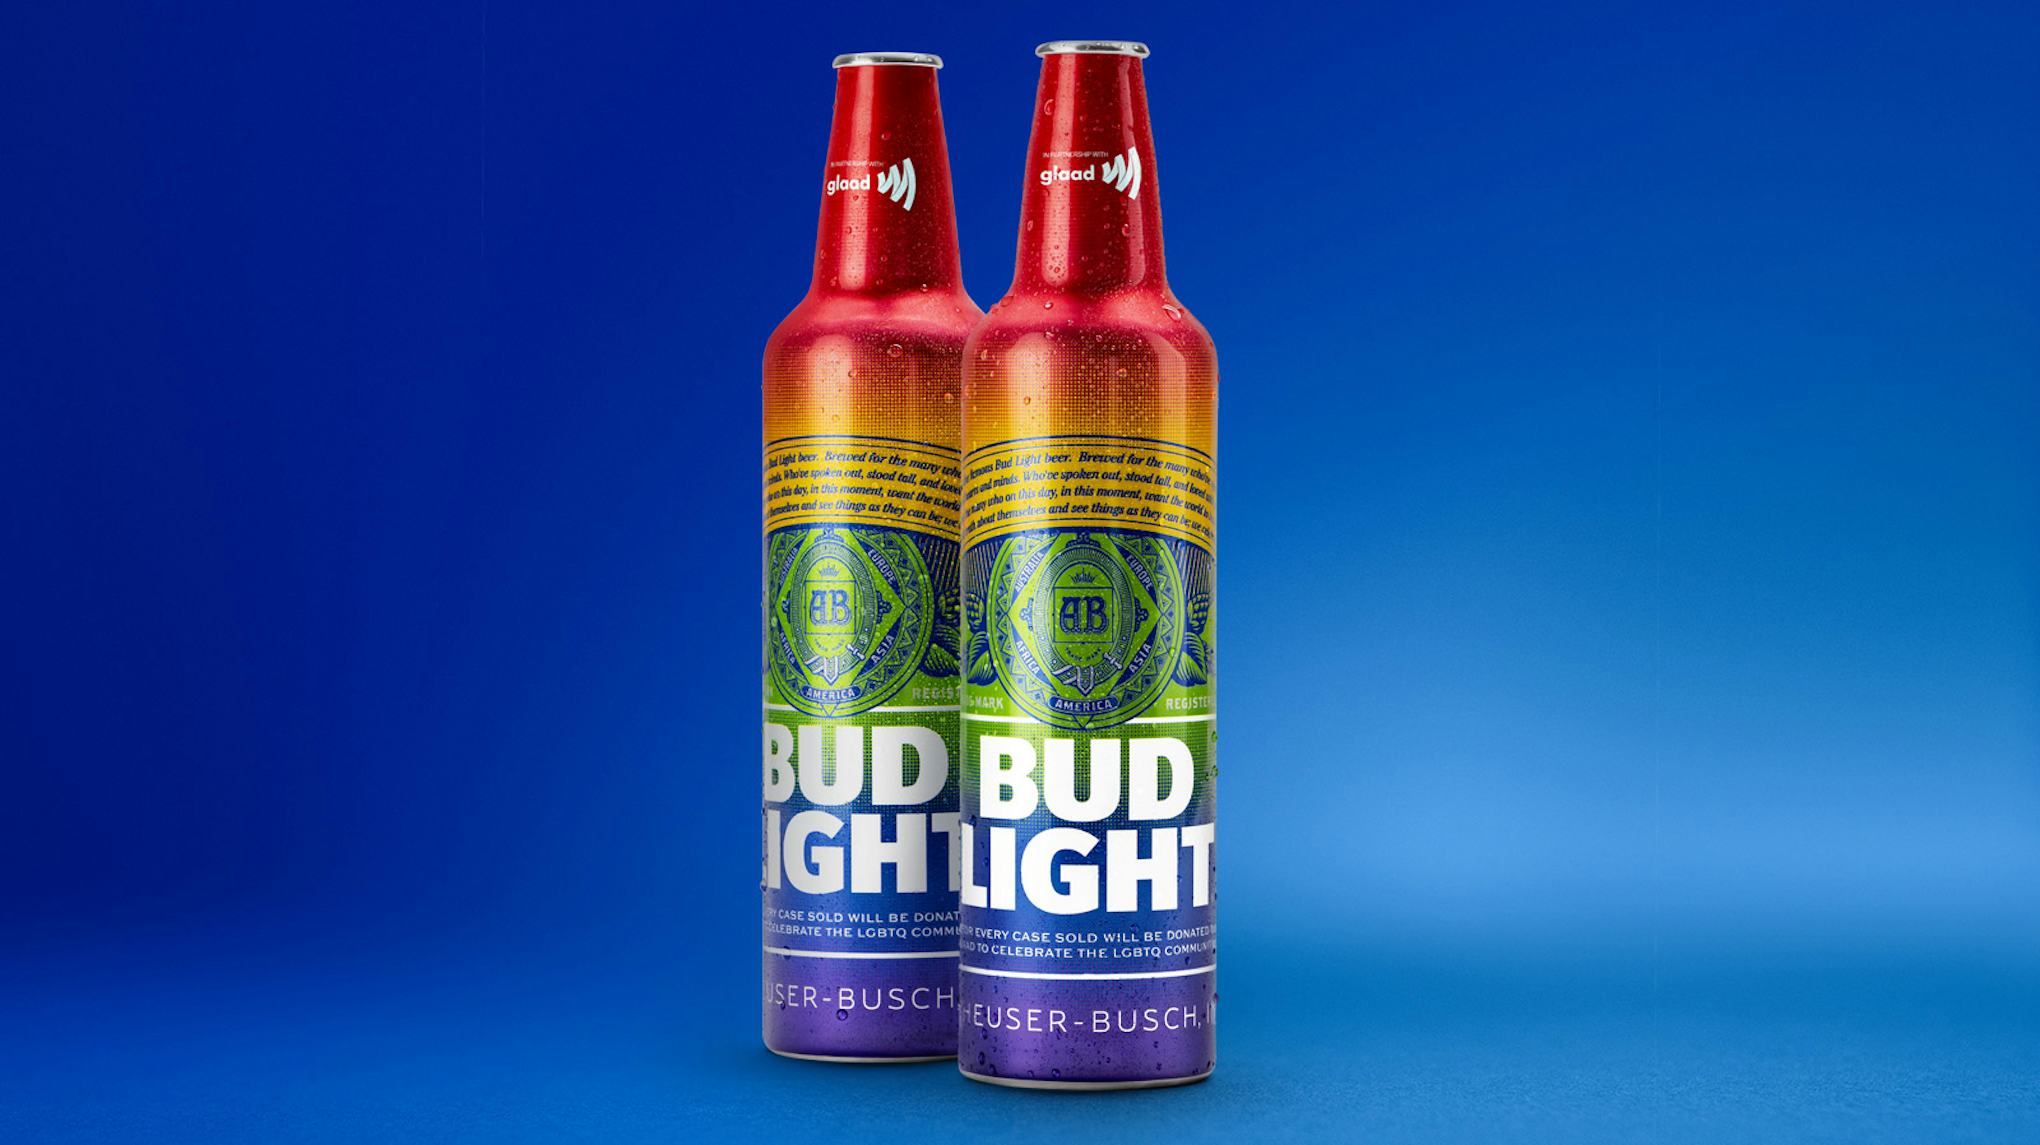 here-s-where-to-get-rainbow-bud-light-glaad-bottles-to-show-your-pride